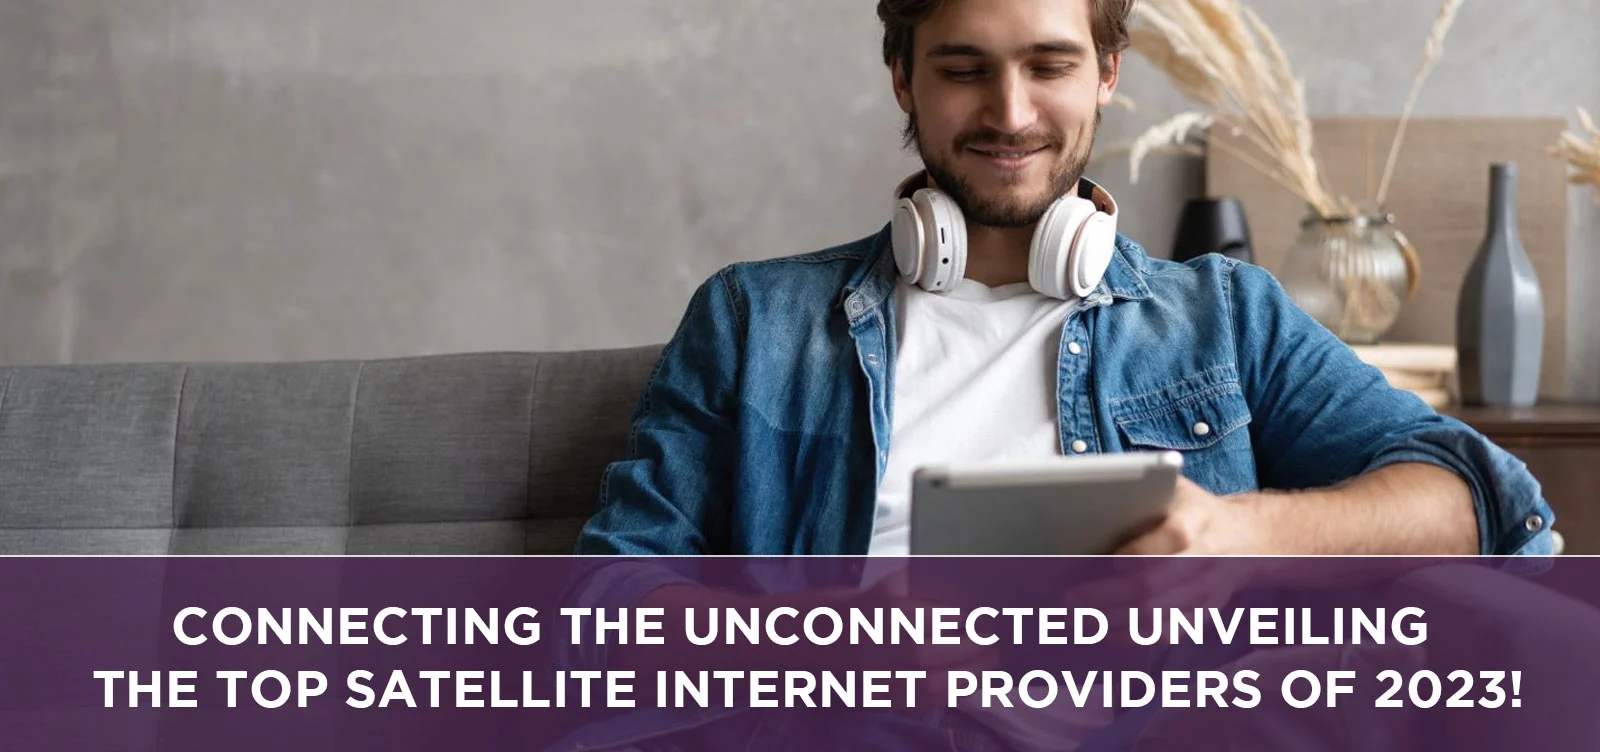 Connecting the Unconnected Unveiling the Top Satellite Internet Providers of 2023!